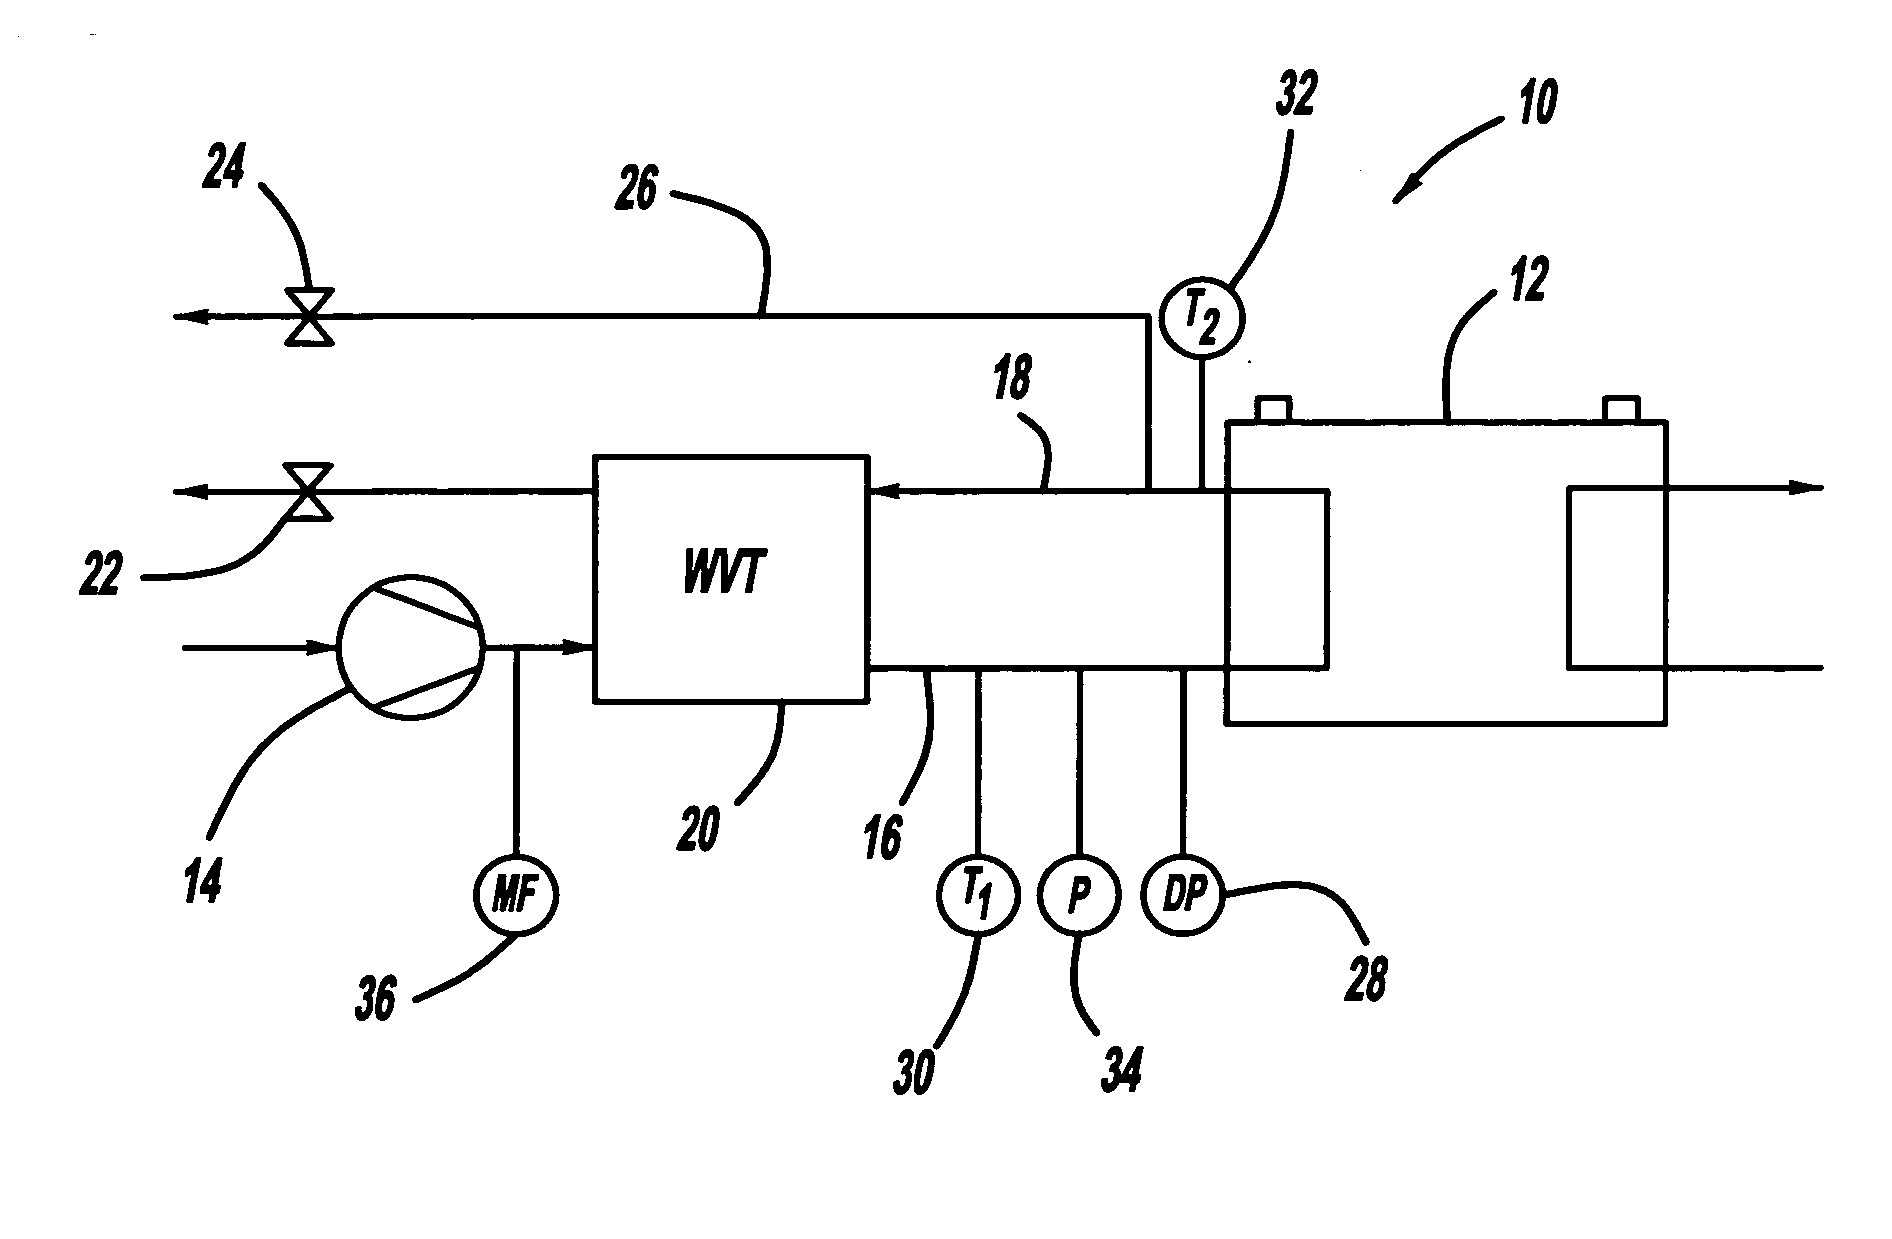 Sensorless relative humidity control in a fuel cell application